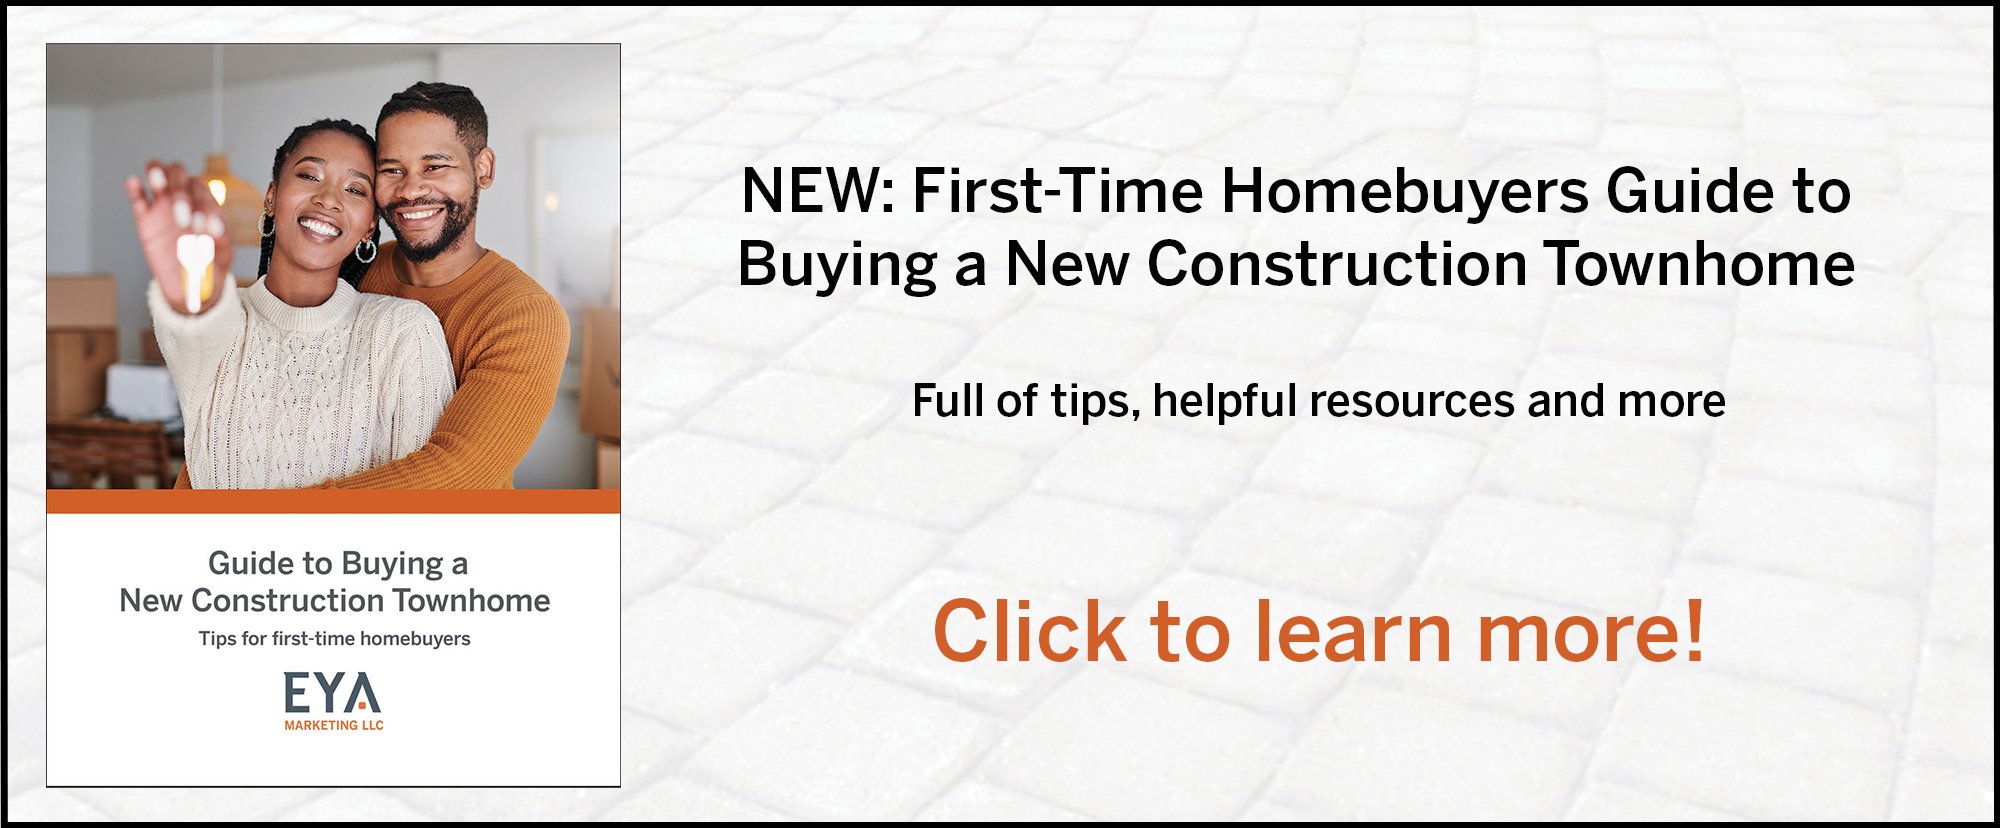 Guide to Buying a New Construction Townhome